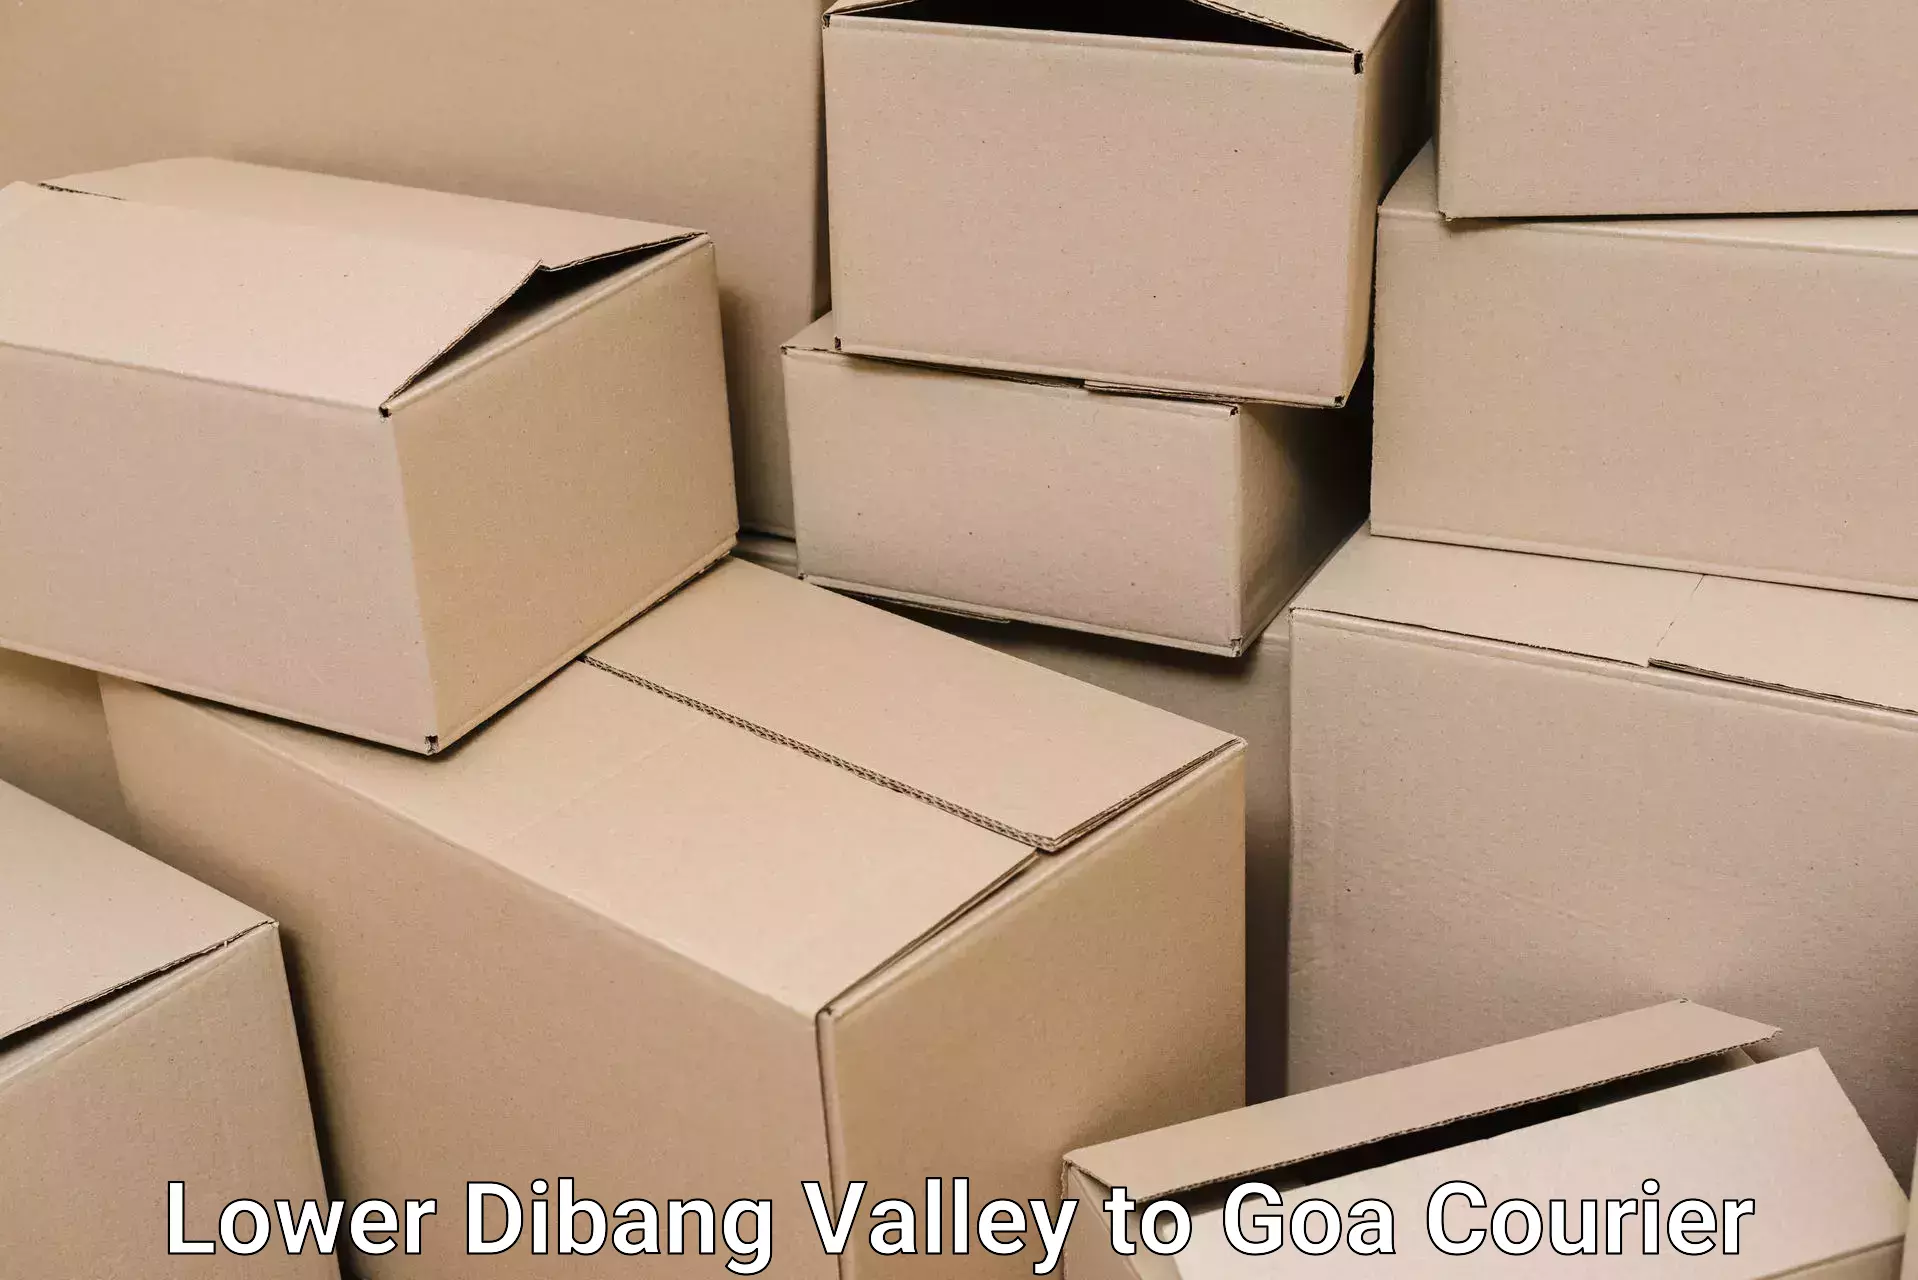 Trusted moving company Lower Dibang Valley to Mormugao Port